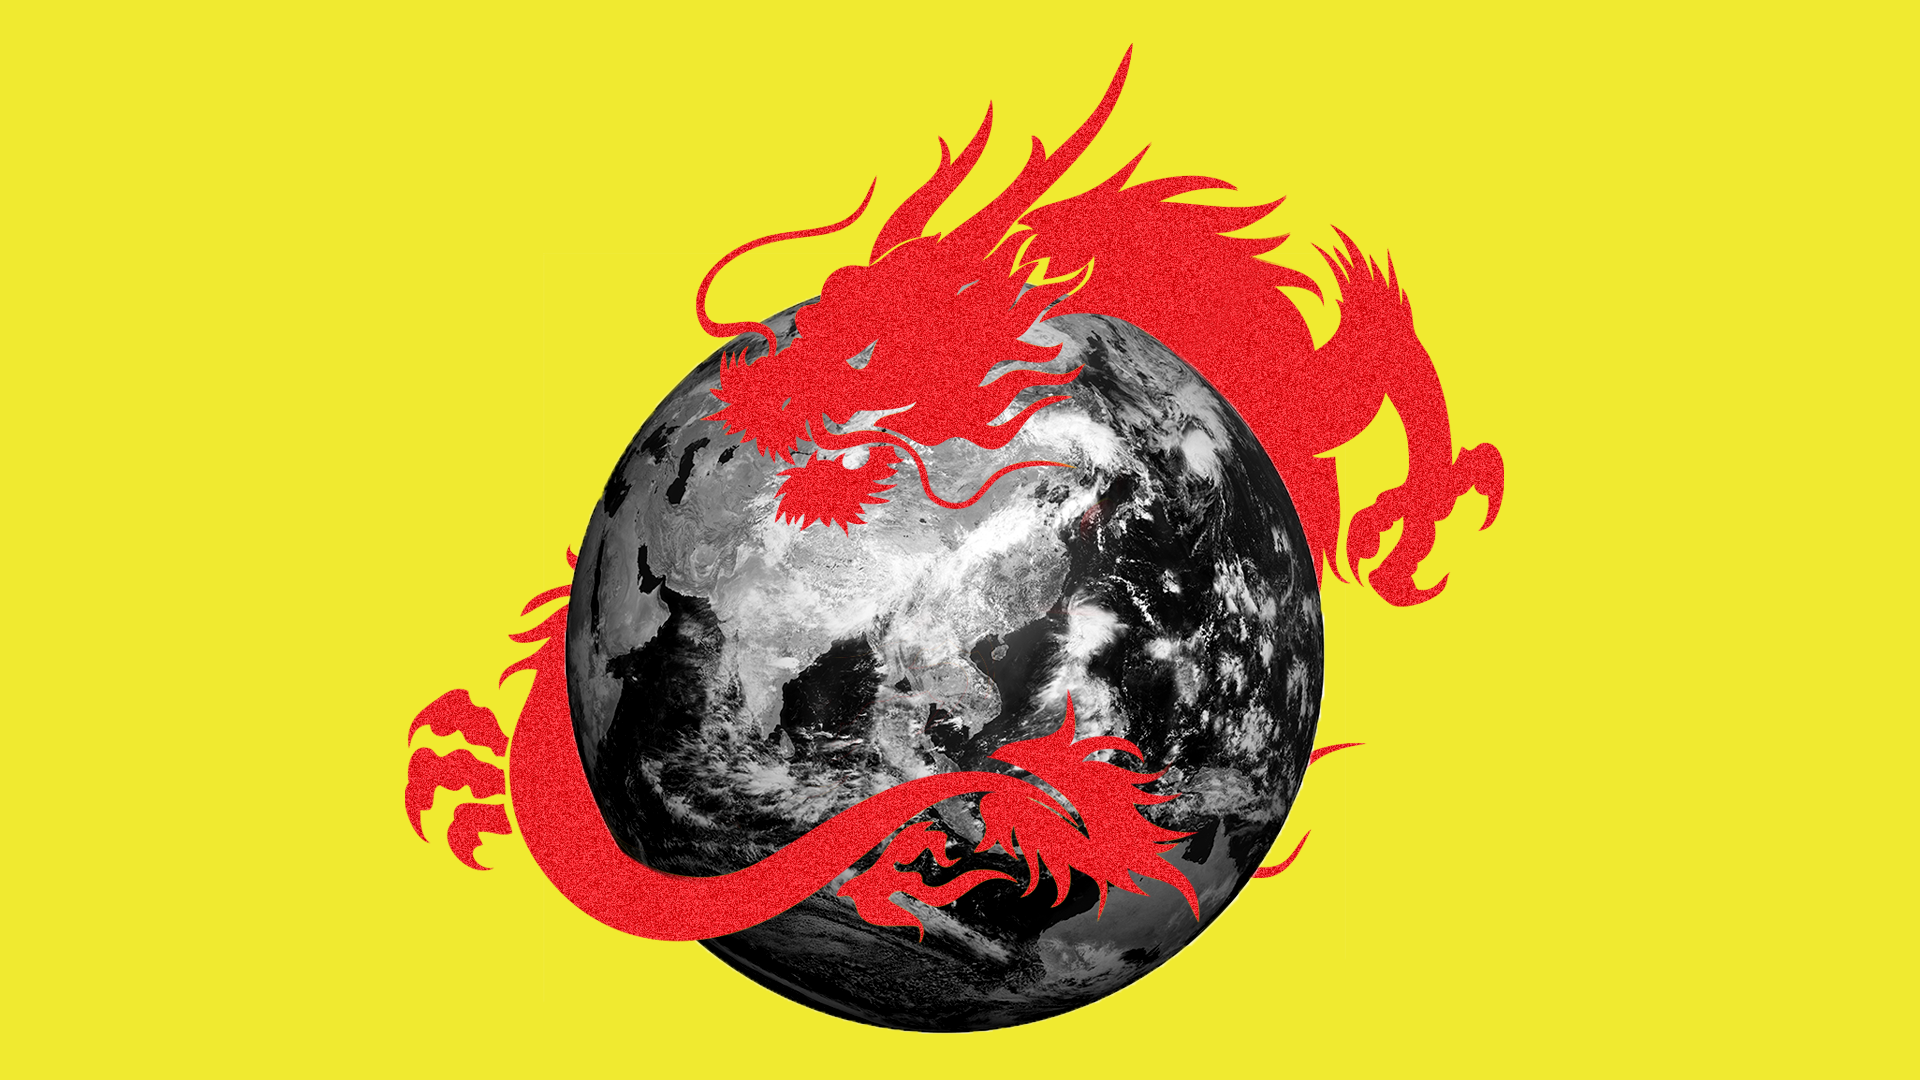 Global Risks 2035: The rise of China and the danger of climate change - Axios